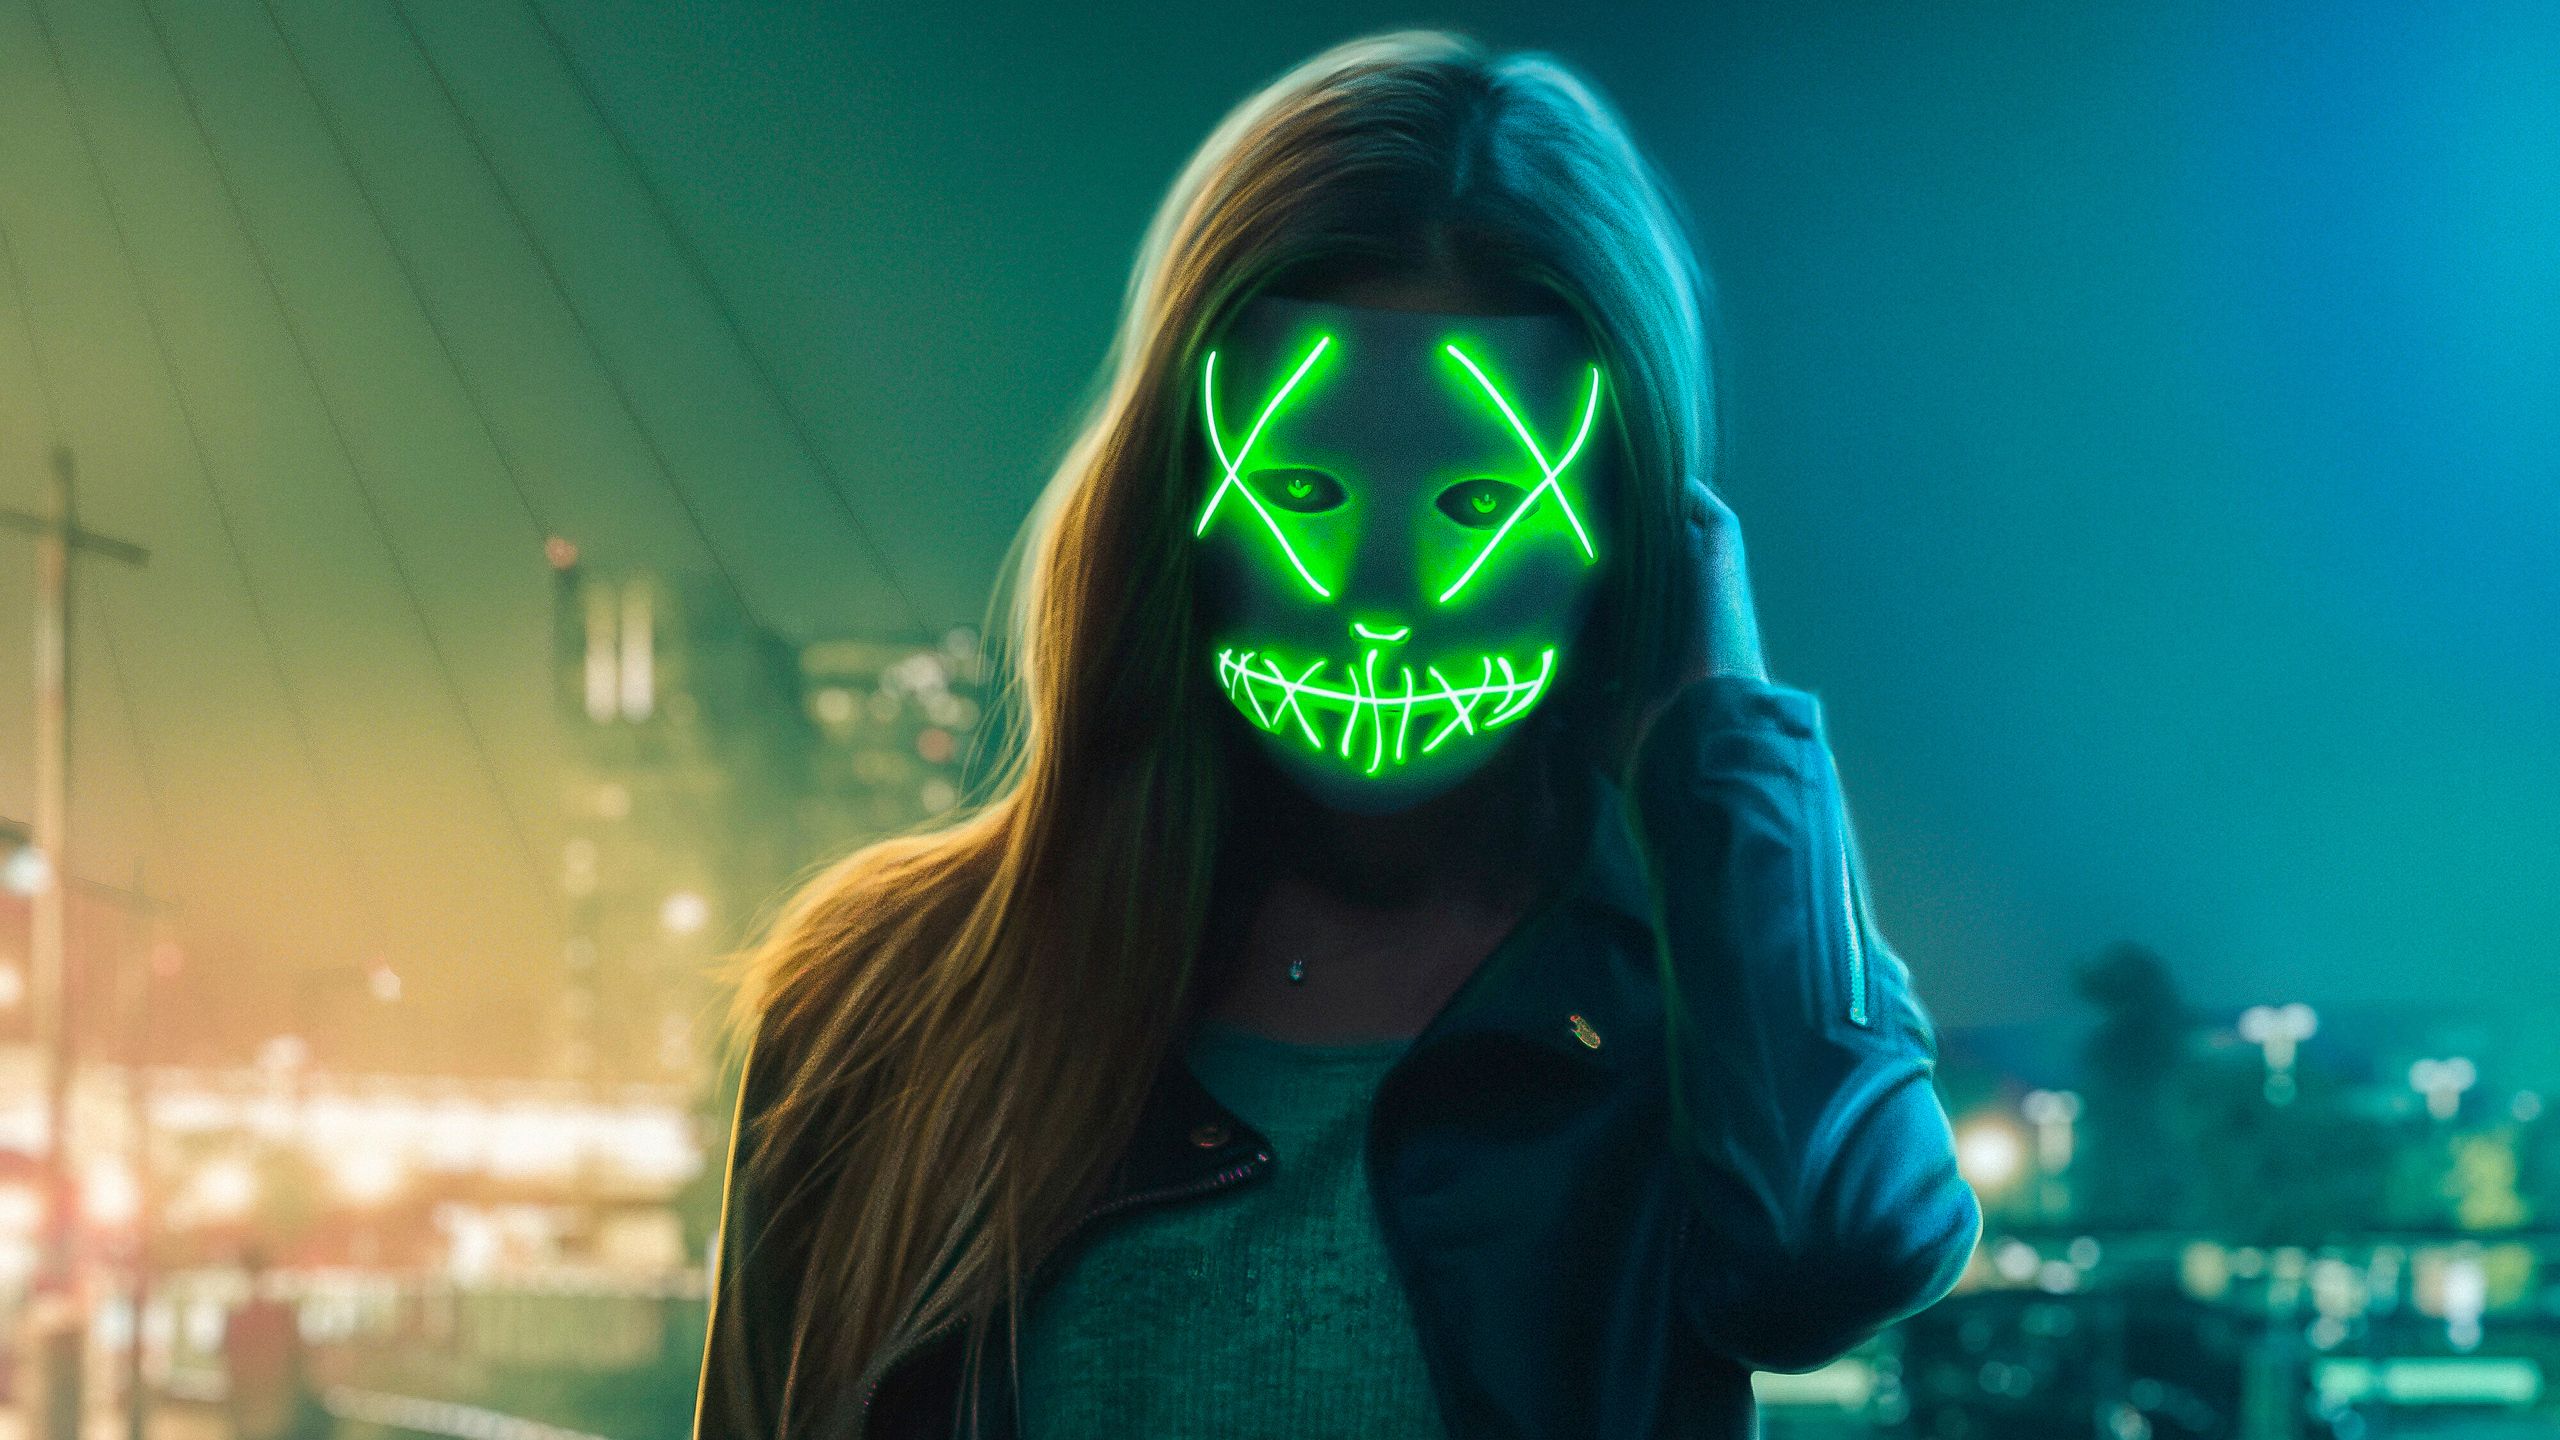 Neon Eye Mask Girl 1440P Resolution HD 4k Wallpaper, Image, Background, Photo and Picture